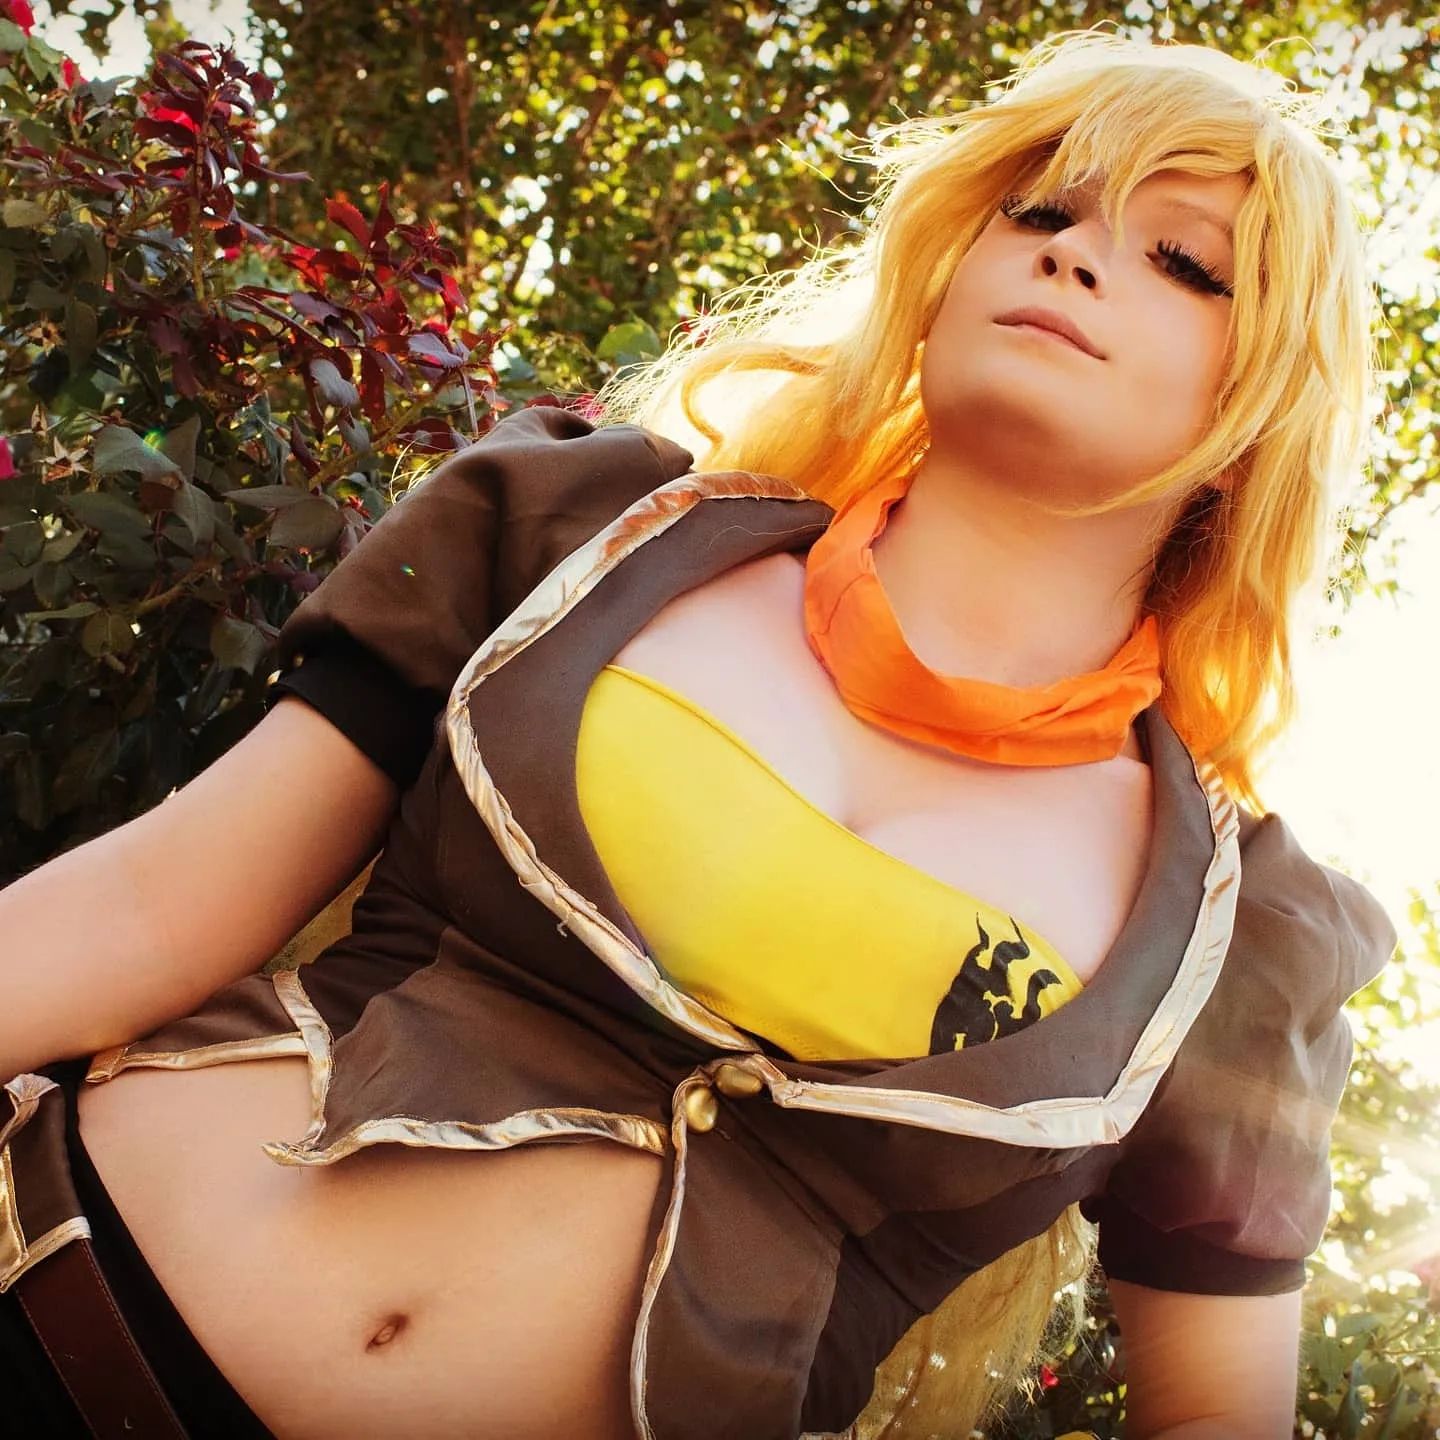 WHO ALL IS HYPED FOR THE #RWBY ANIME?! 

our v1 outfits are coming back! I still have mine - I'd prod need to adjust it though cause my flex is much stronger now 😅

Yangs new outfit though 👀 ugggh now I gotta make that one 

Most pics by @kevinthedirector

#cosplay #rwbycosplay #yangxiaolongcosplay #yang #yangcosplay #yangxiaolong #rwbyicequeendom #anime #animecosplay #roosterteeth